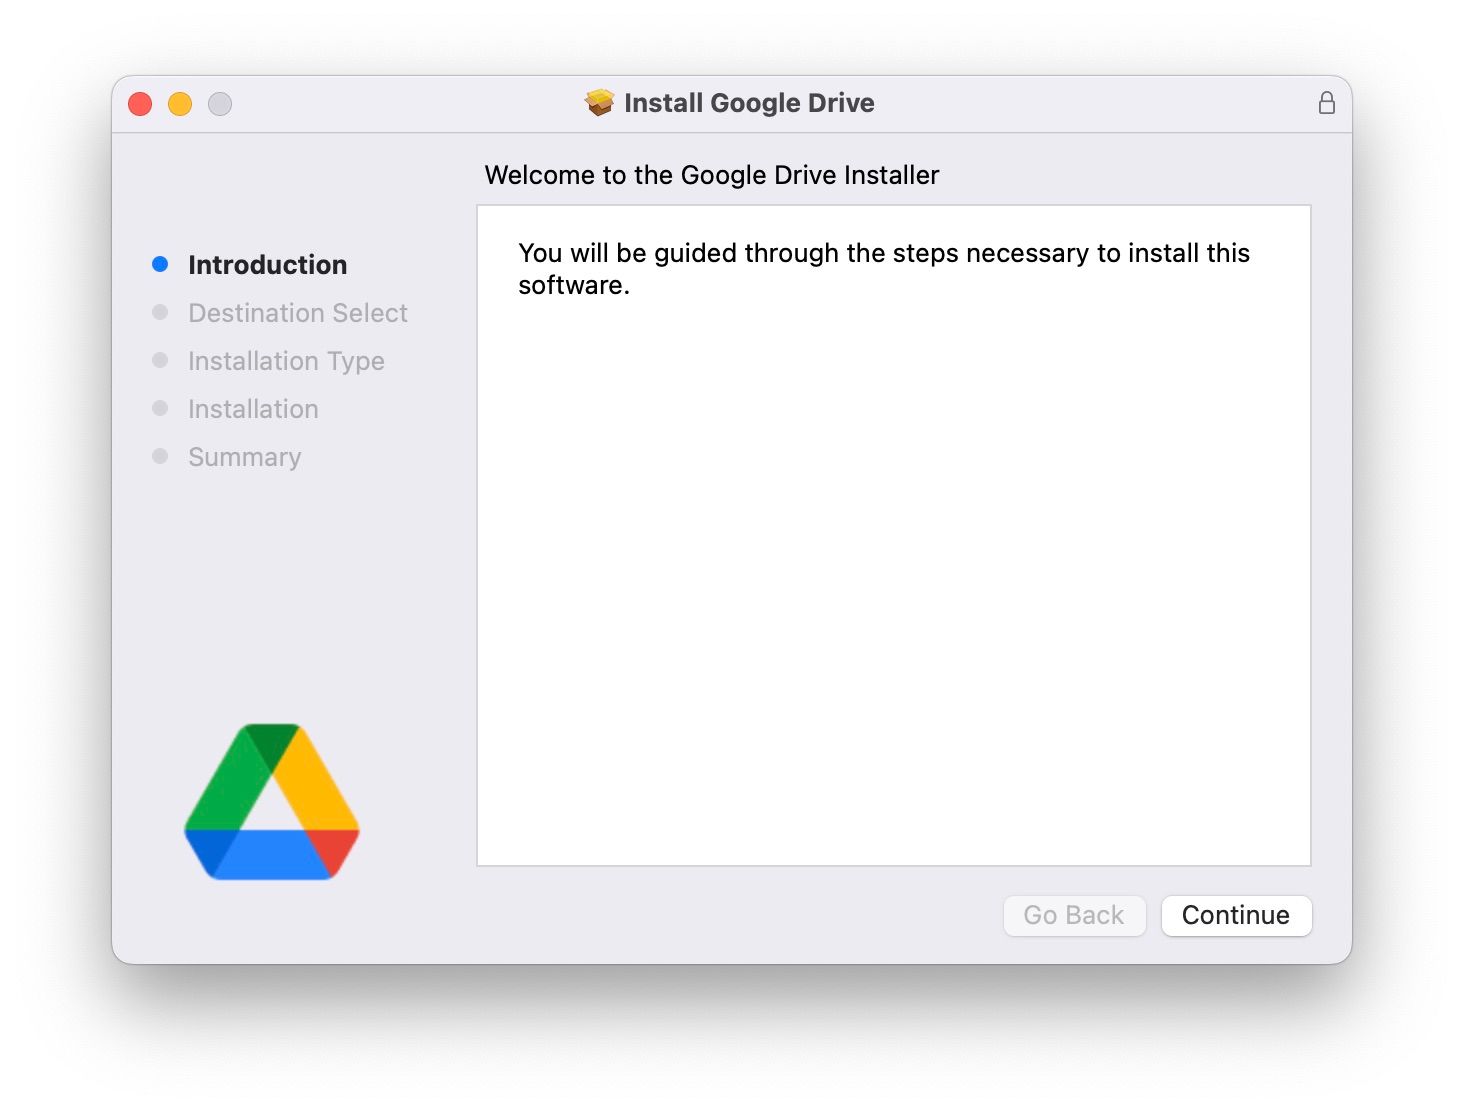 A screenshot of the Google Drive Installer window on a Mac with a list of installation steps on the left, including 'Introduction', 'Destination Select', 'Installation Type', 'Installation', and 'Summary'. The 'Continue' button is at the bottom right, indicating the start of the installation process.